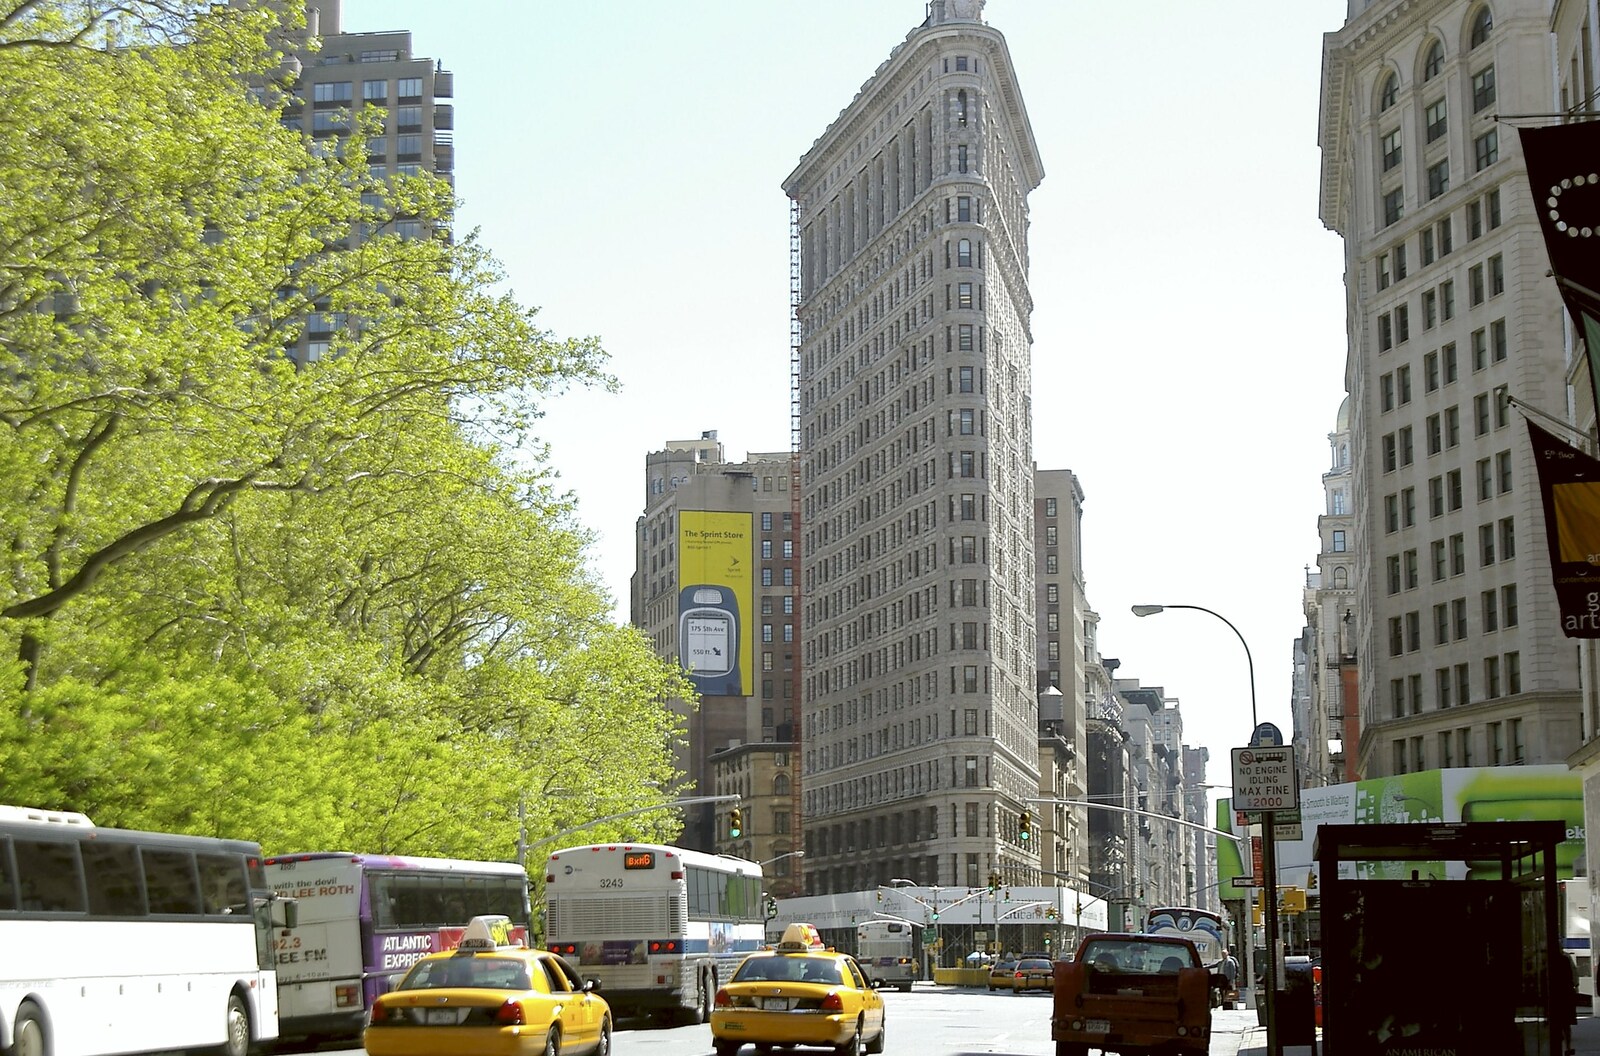 The Flatiron Building from Times Square, the Empire State and Ground Zero, New York, US - 1st May 2006